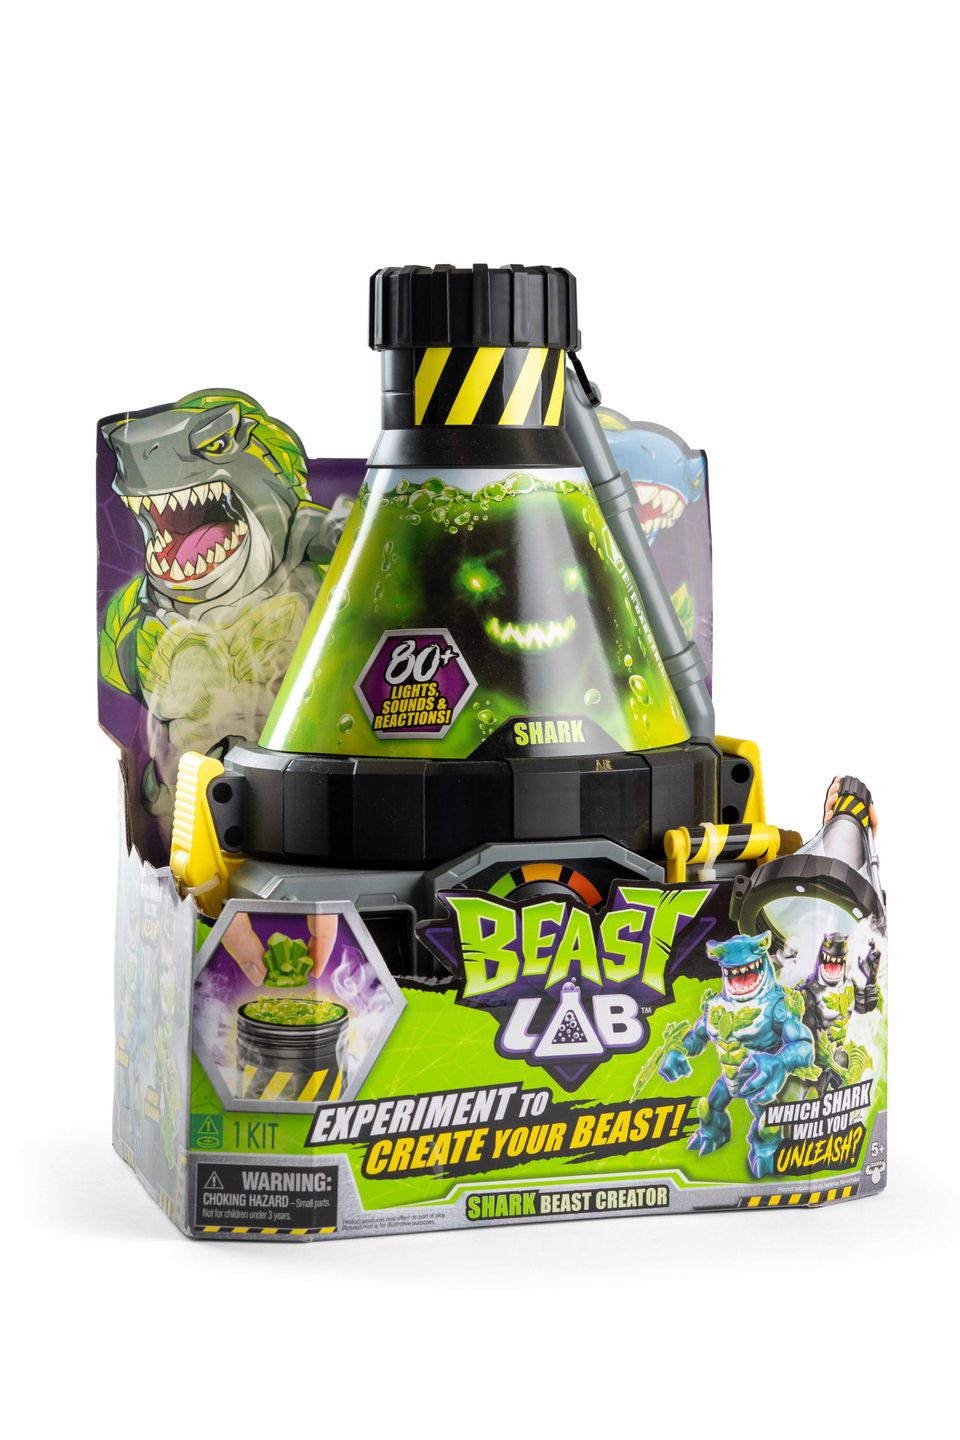 Toy reveal of Beast Lab. This is a great kid gift for Christmas